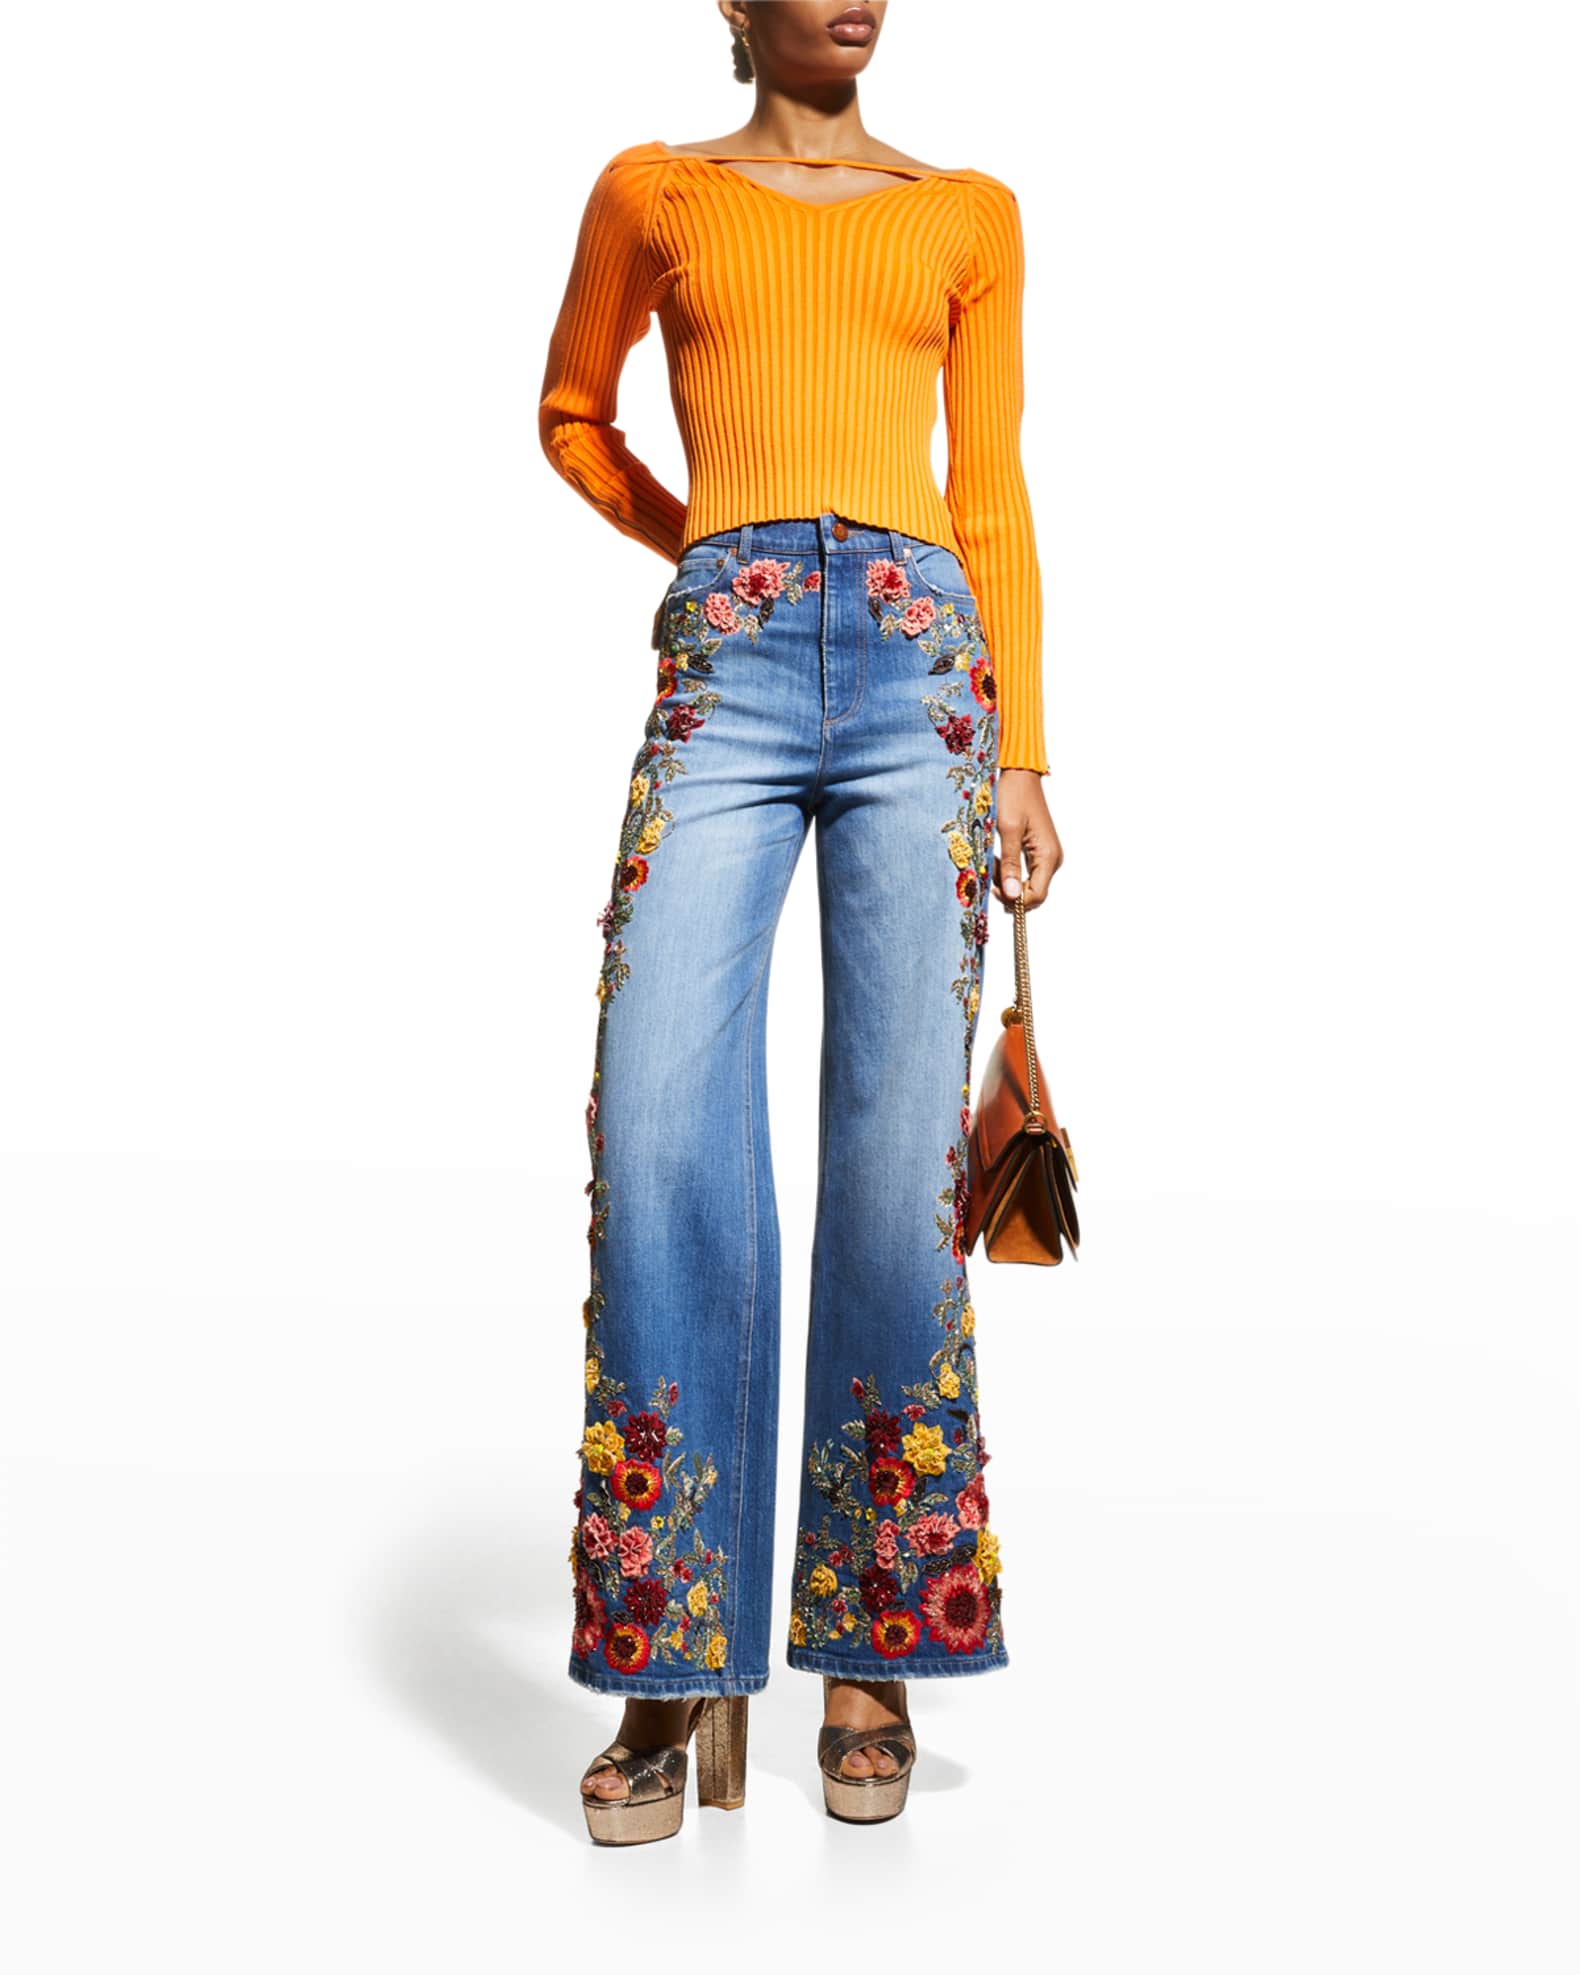 Alice + Olivia Gorgeous Floral Embroidered Wide-Leg Jeans | Neiman Marcus